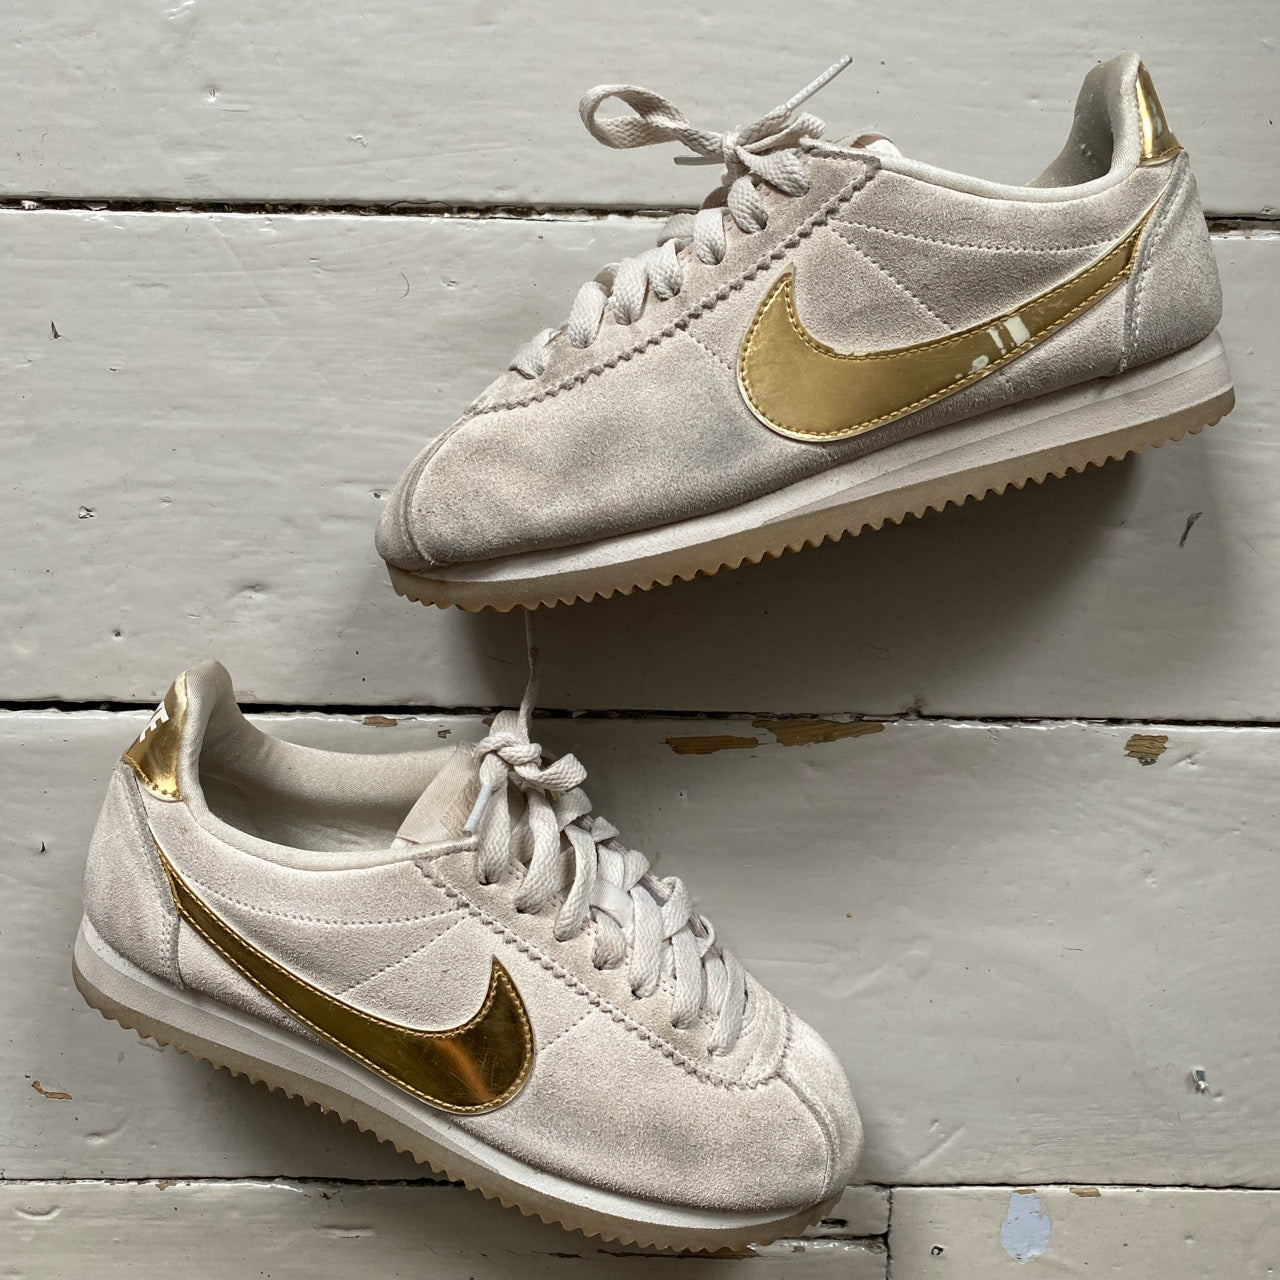 Nike Cortez Gold and Beige Suede (UK 4)